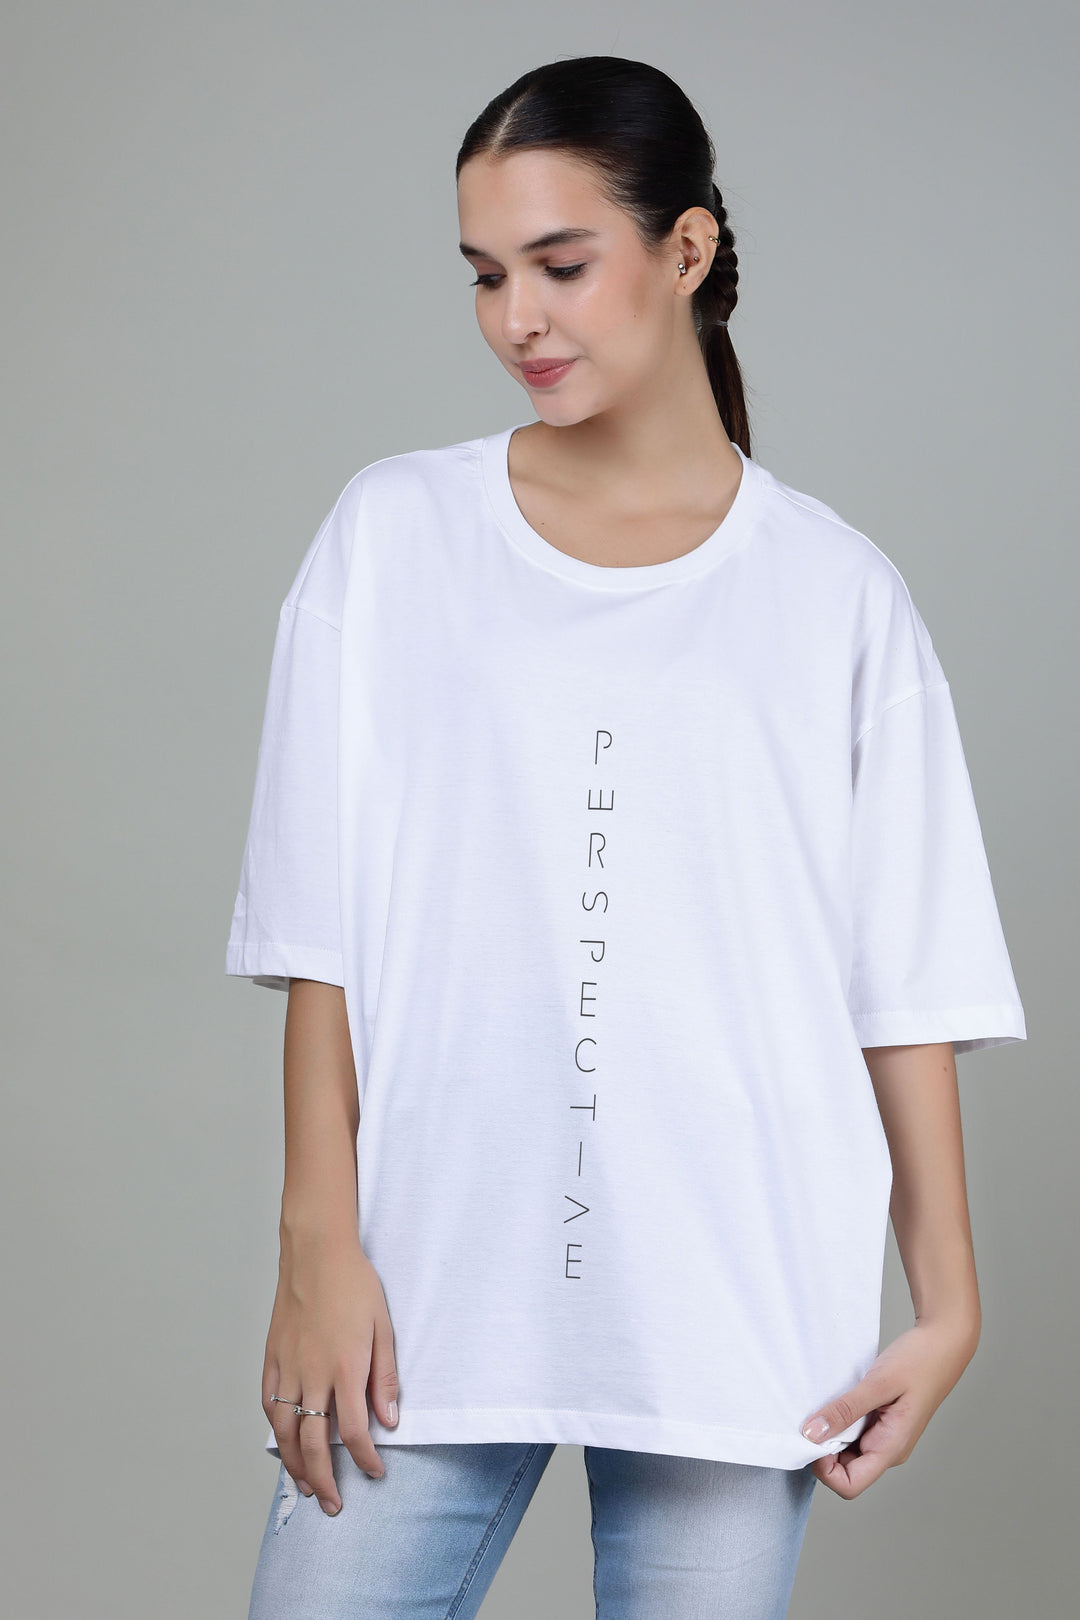 Perspective- Printed Oversized Tees